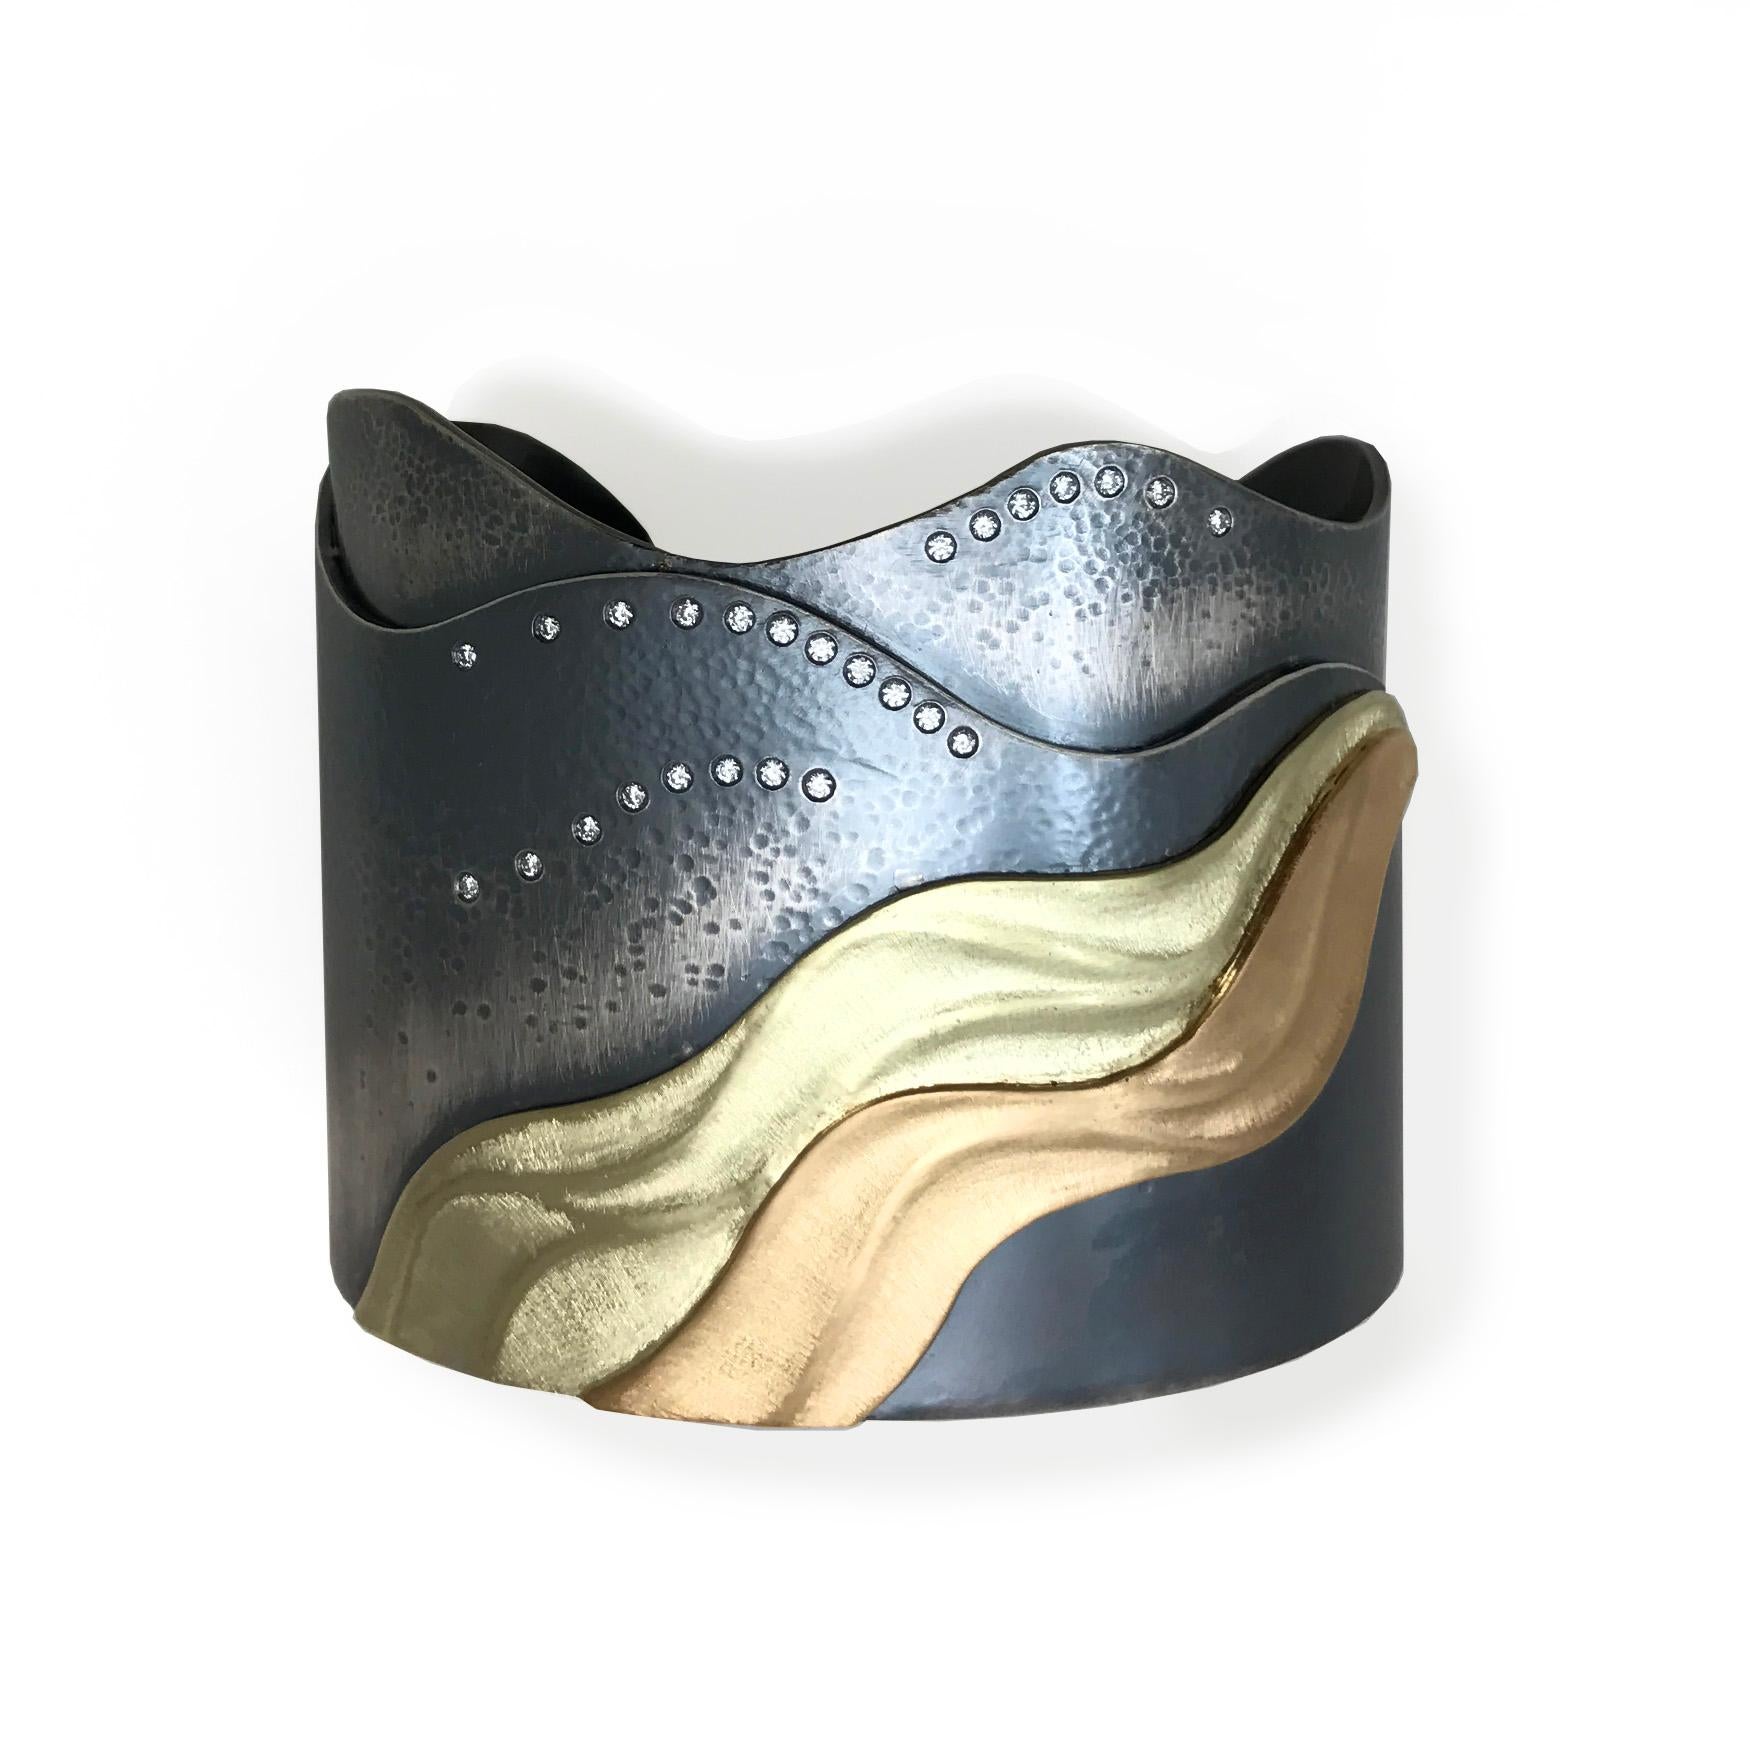 K.MITA's Shoreline Cuff instills a sense of peace and harmony. Waves of oxidized sterling silver gradually retreat from the sandy 18k yellow gold and 14k green gold shoreline. Diamonds 0.26ct sprinkled on the oxidized sterling silver sea reflect the